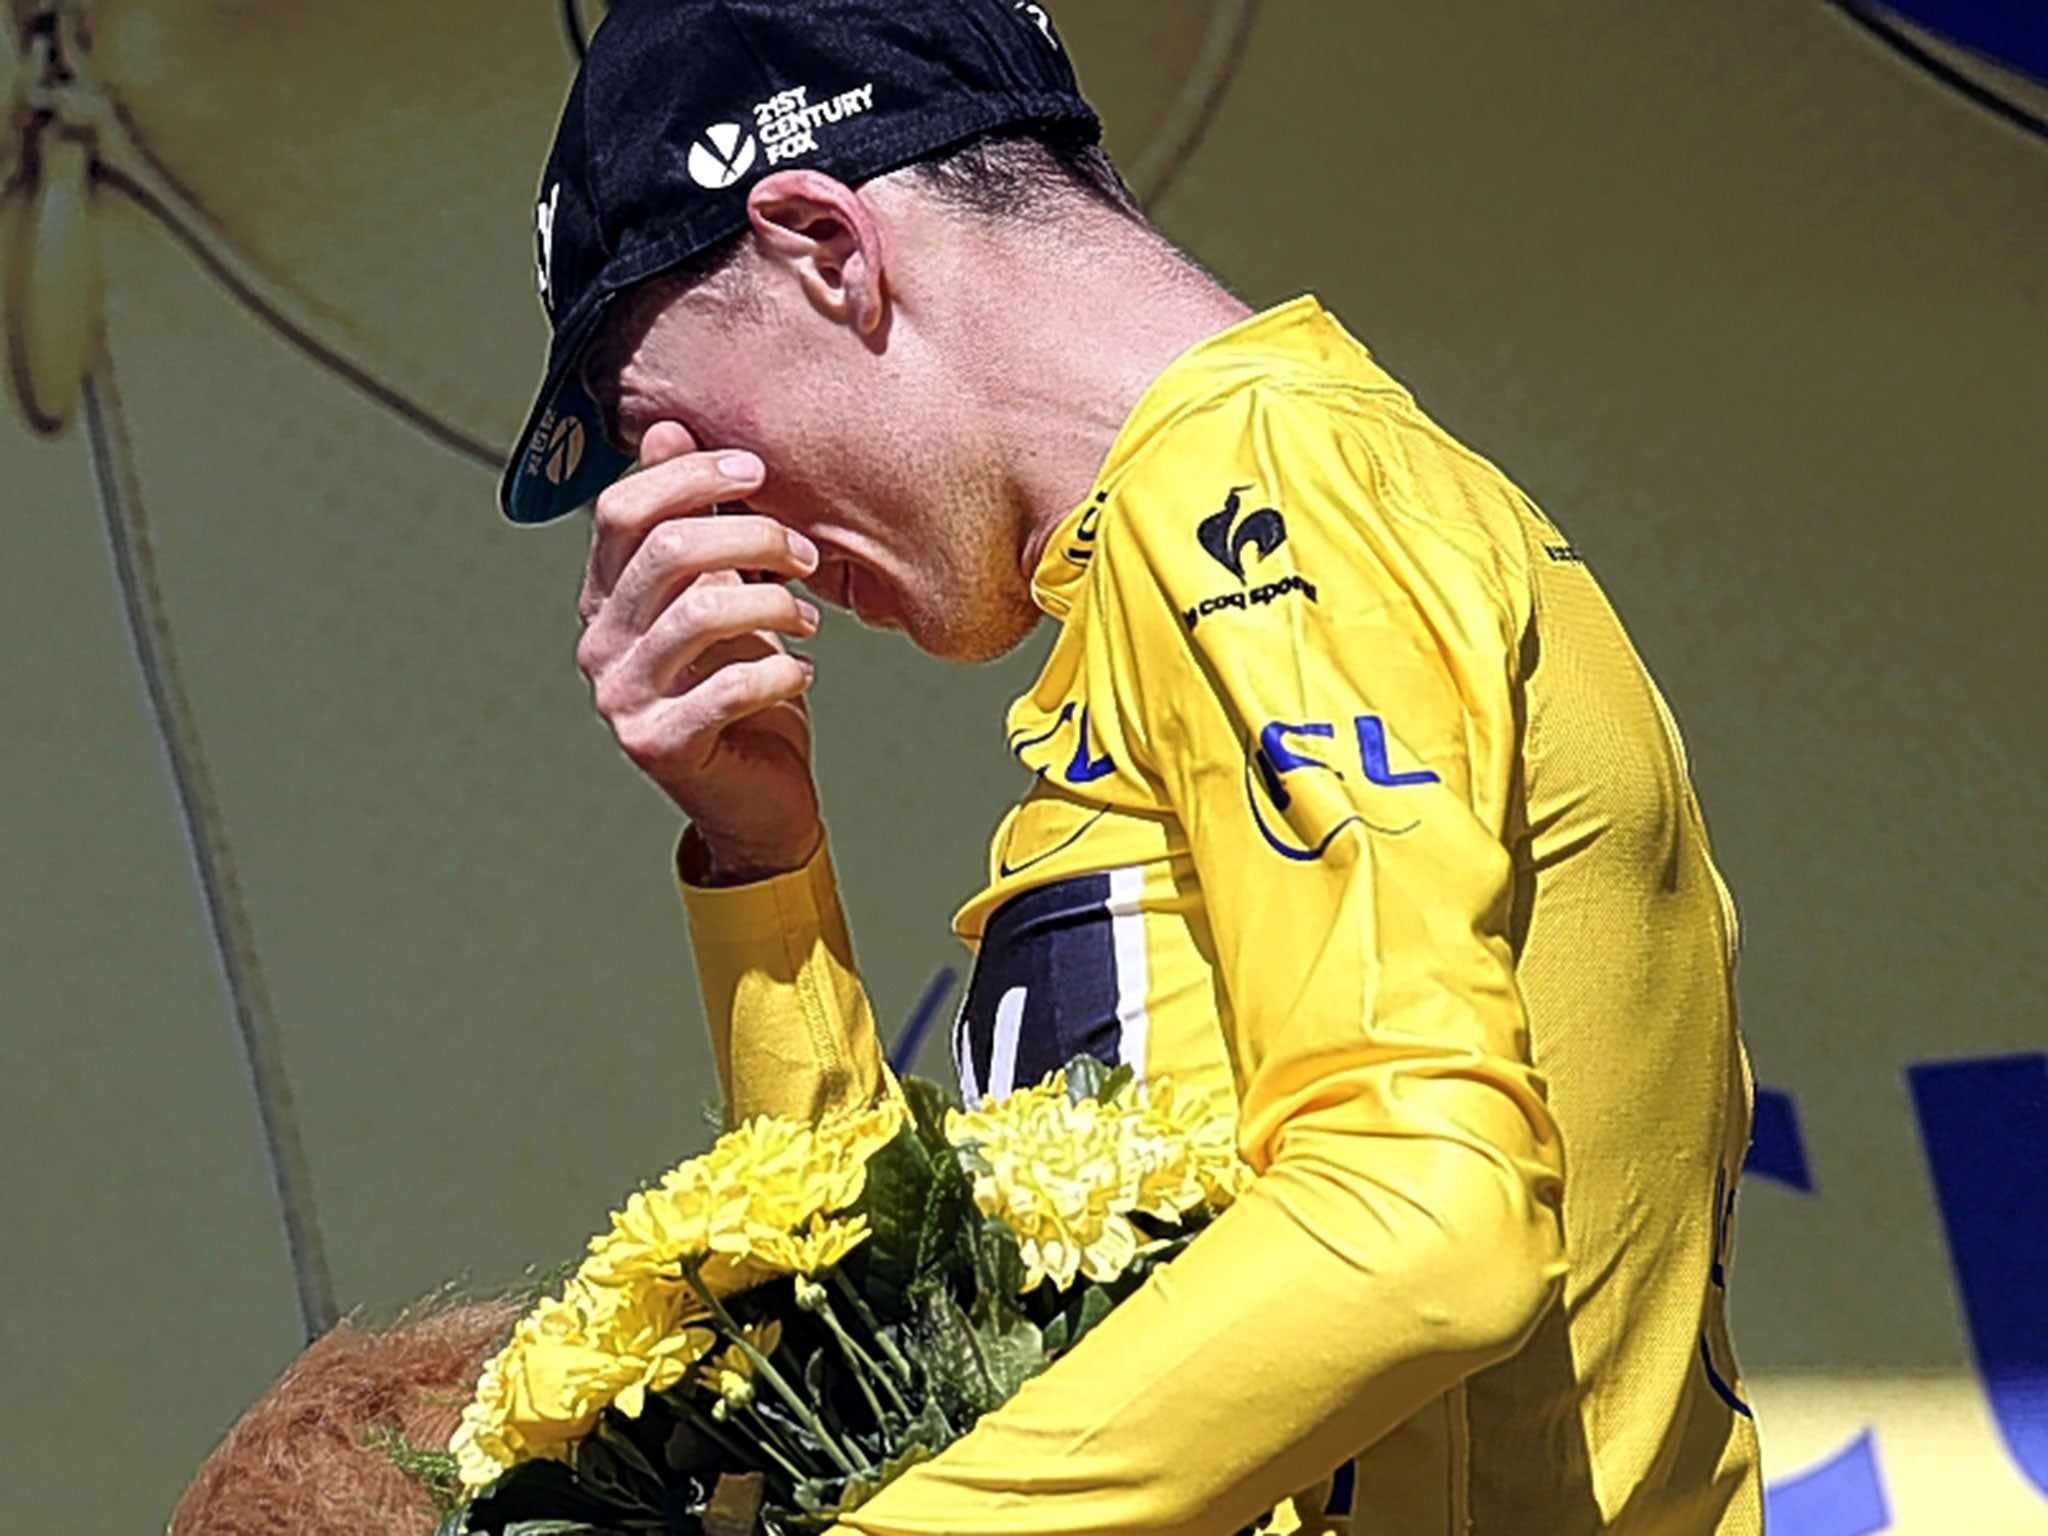 An emotional Chris Froome on the podium